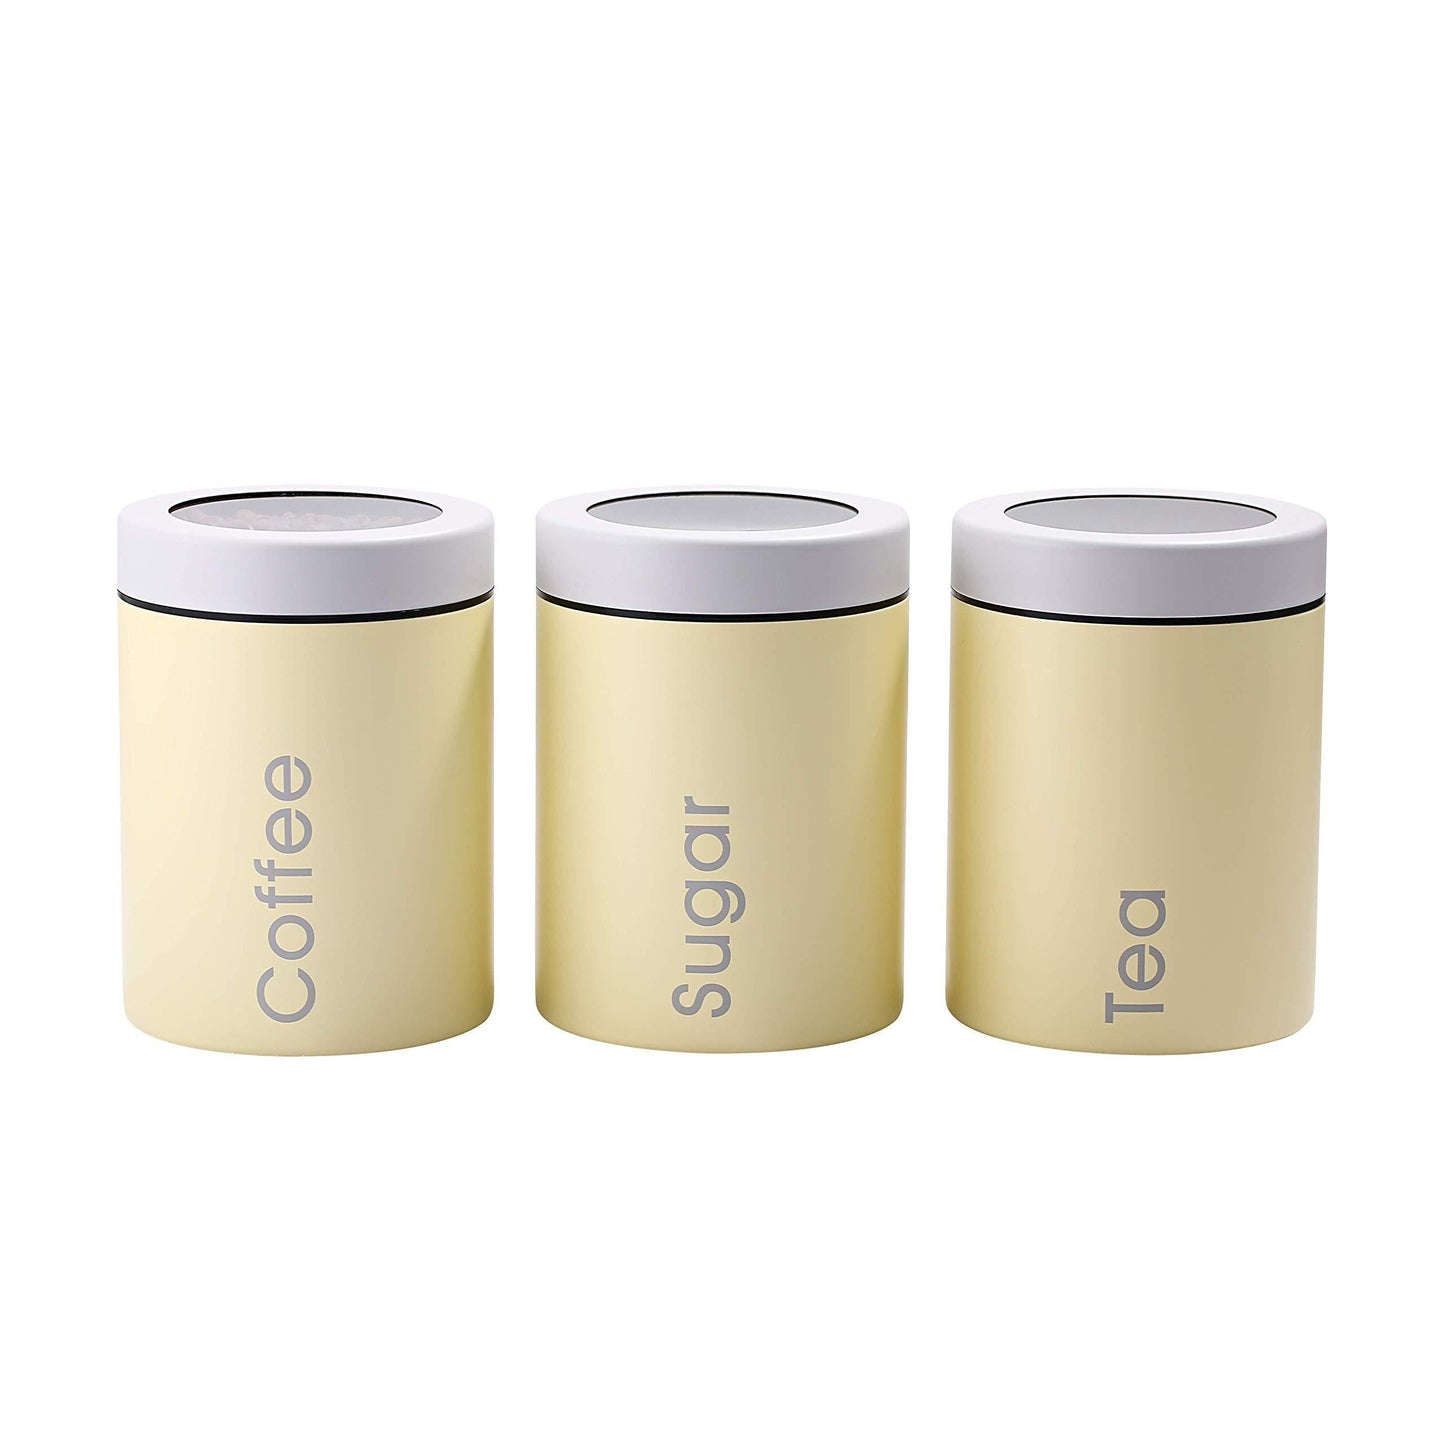 Home adzukio modern stylish canisters sets for kitchen counter 3 piece canister for tea sugar coffee food storage container multipurpose light yellow